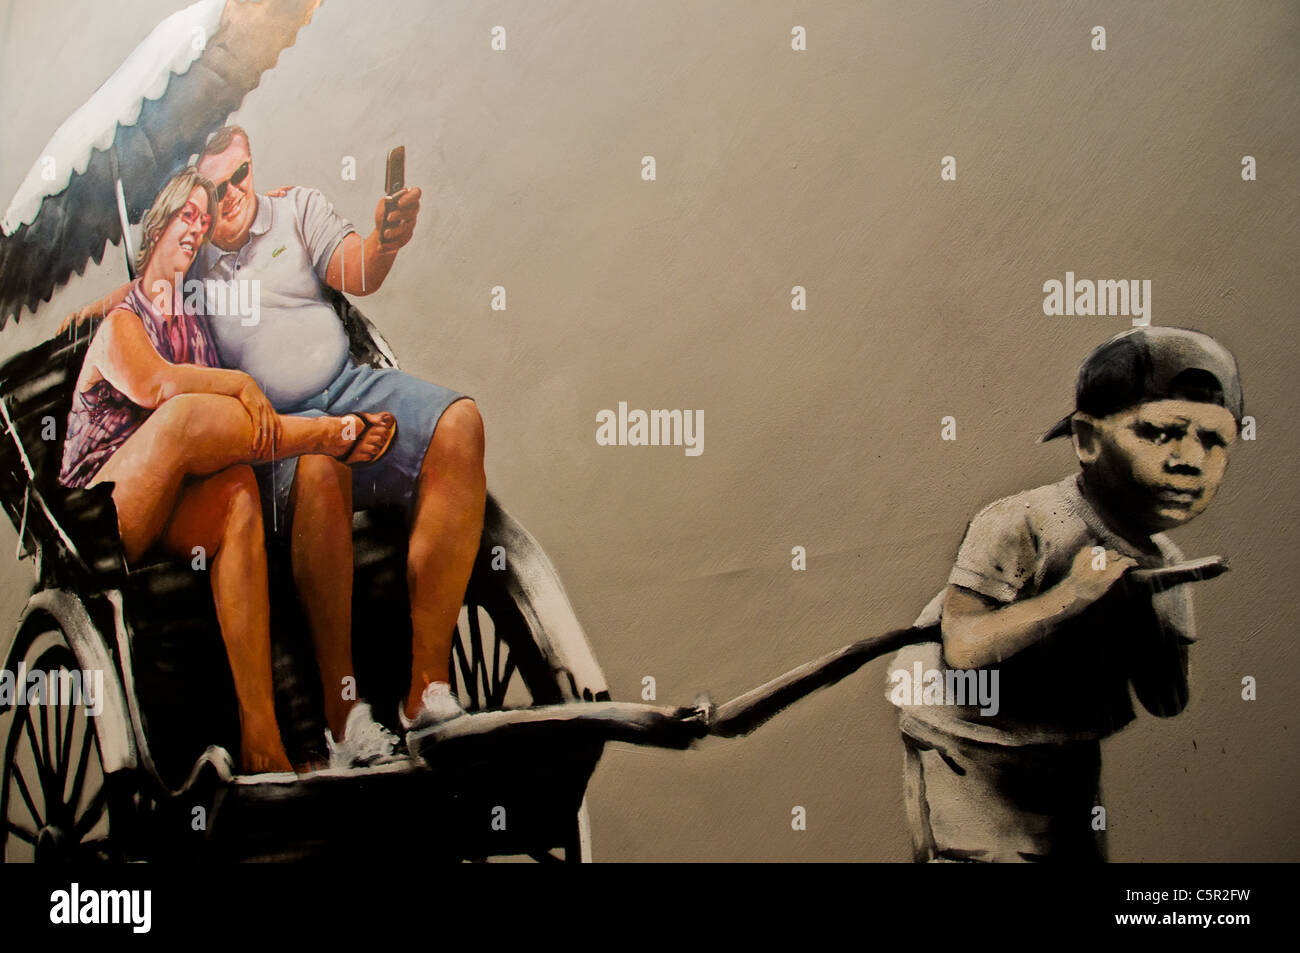 Banksy picture of small third world boy pulling 2 large Western tourists in a rickshaw Stock Photo